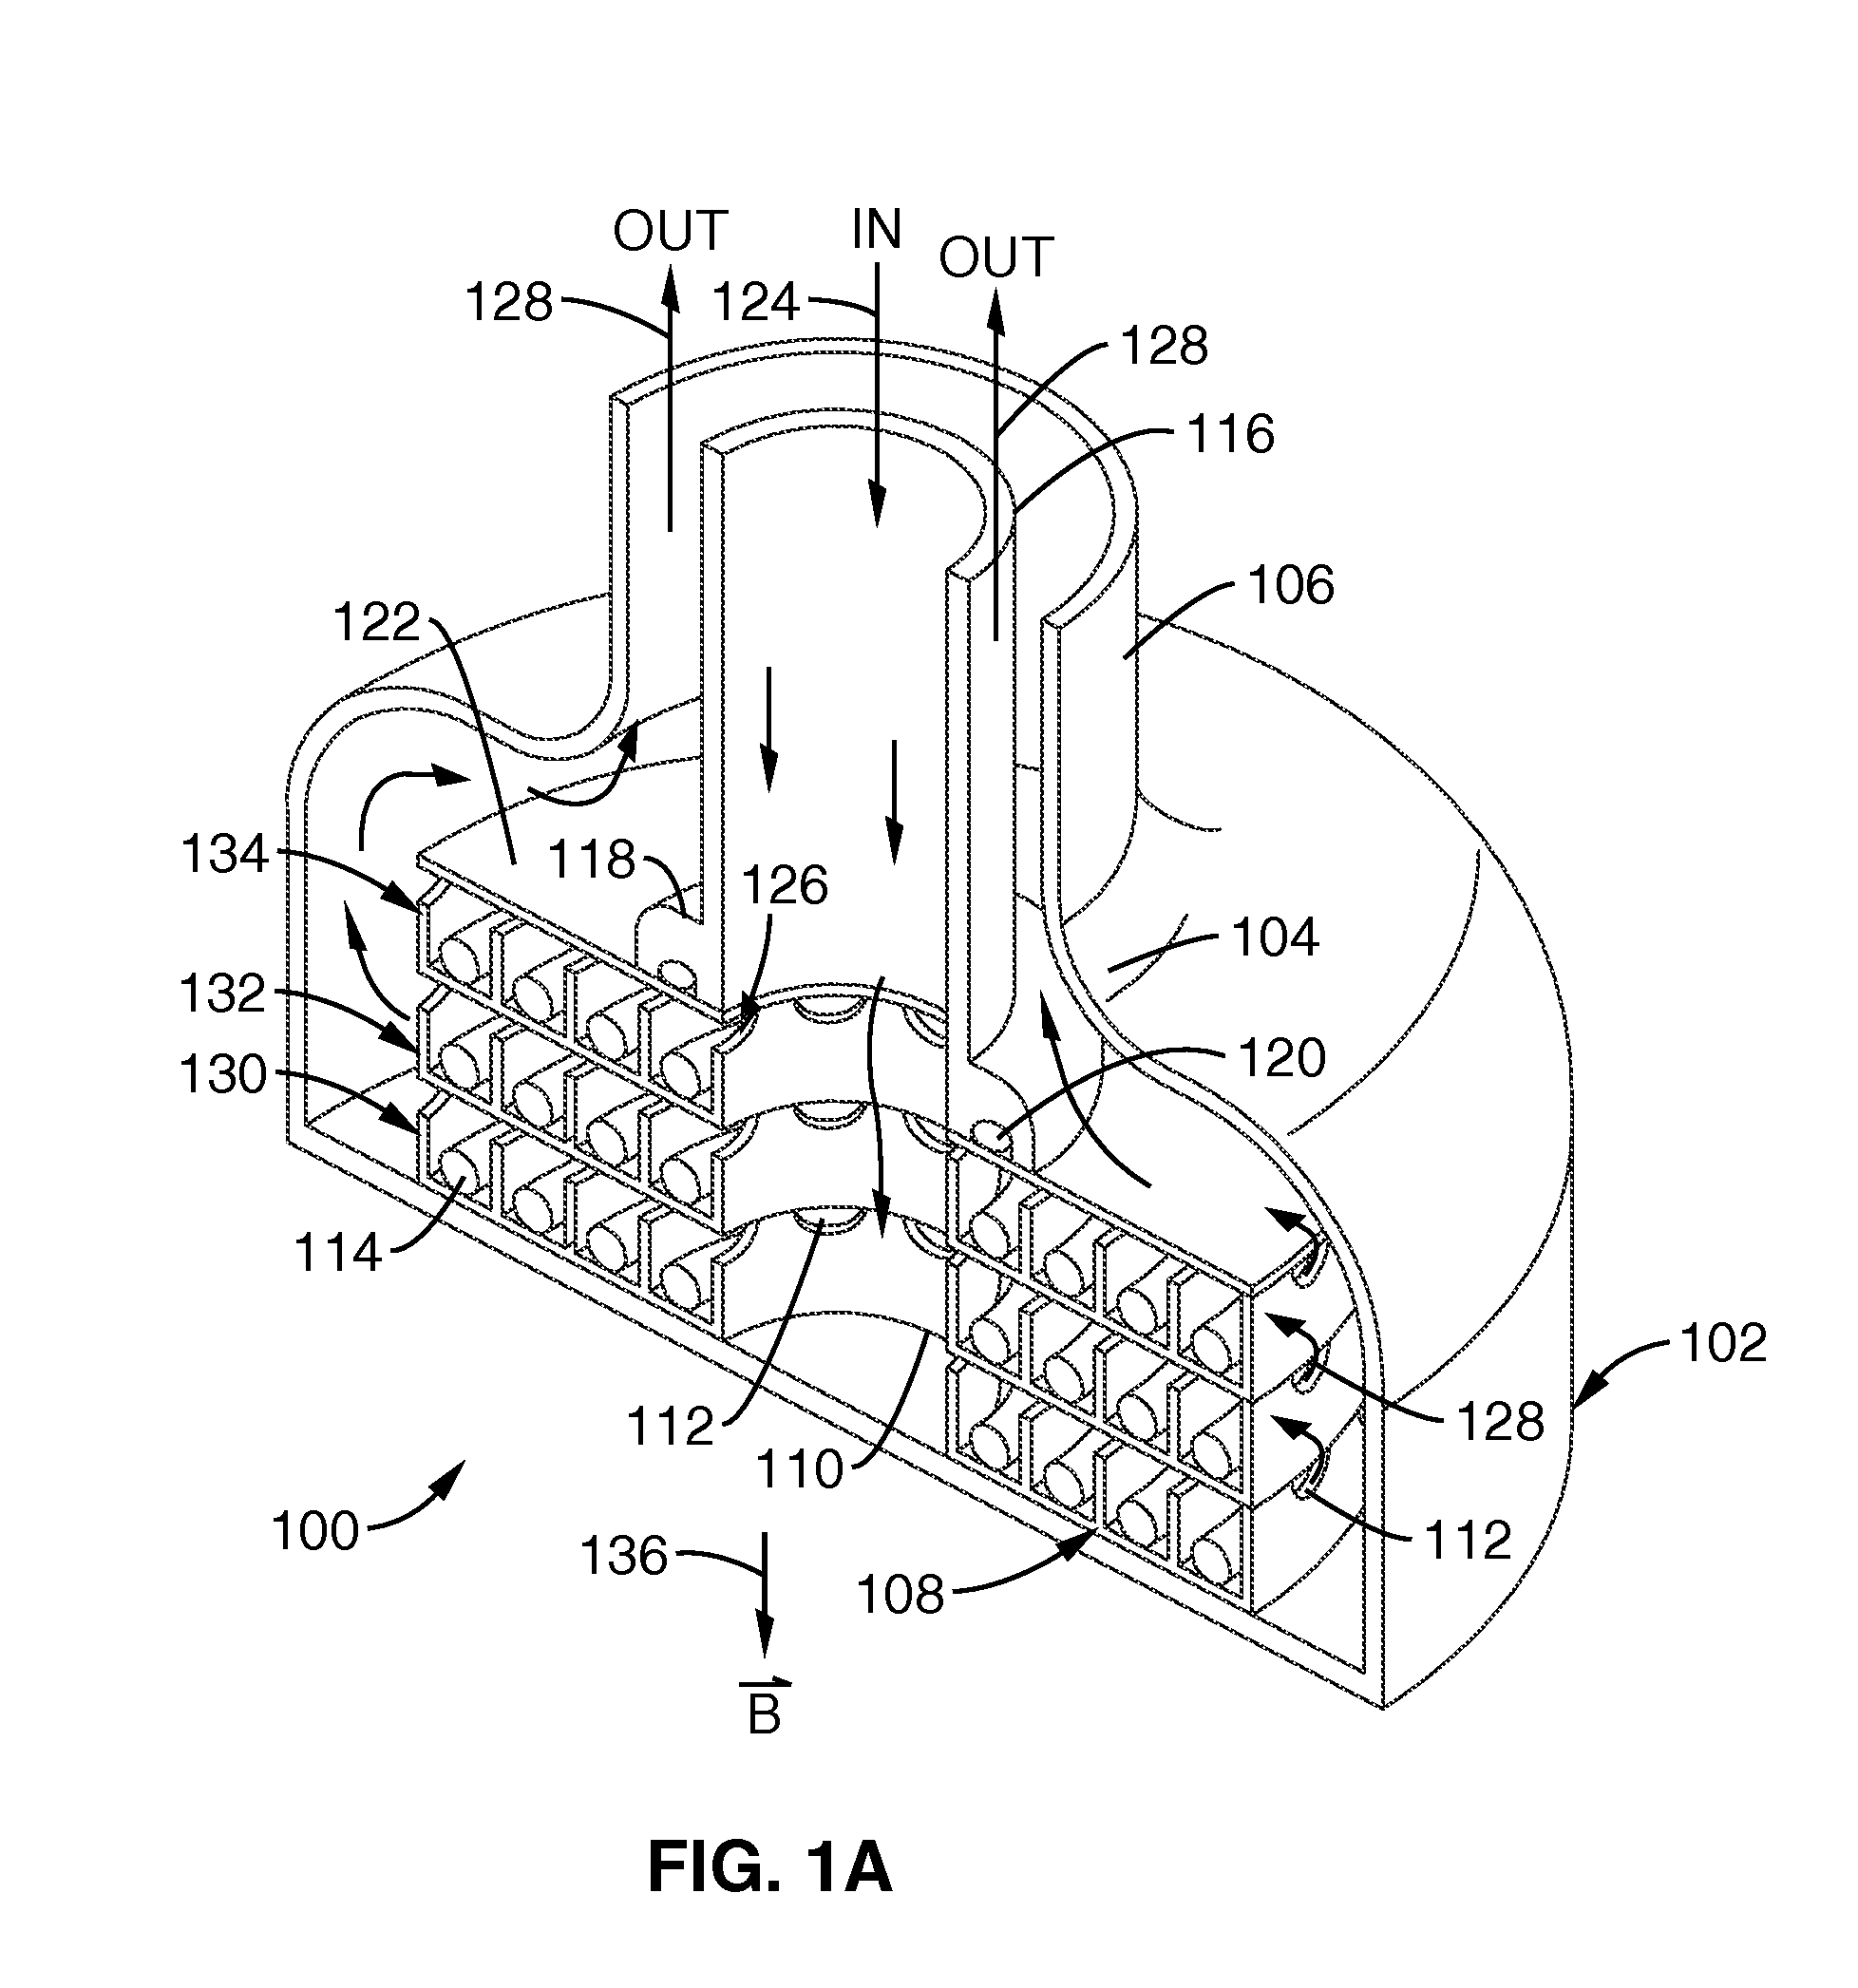 Apparatus and method for transcranial and nerve magnetic stimulation